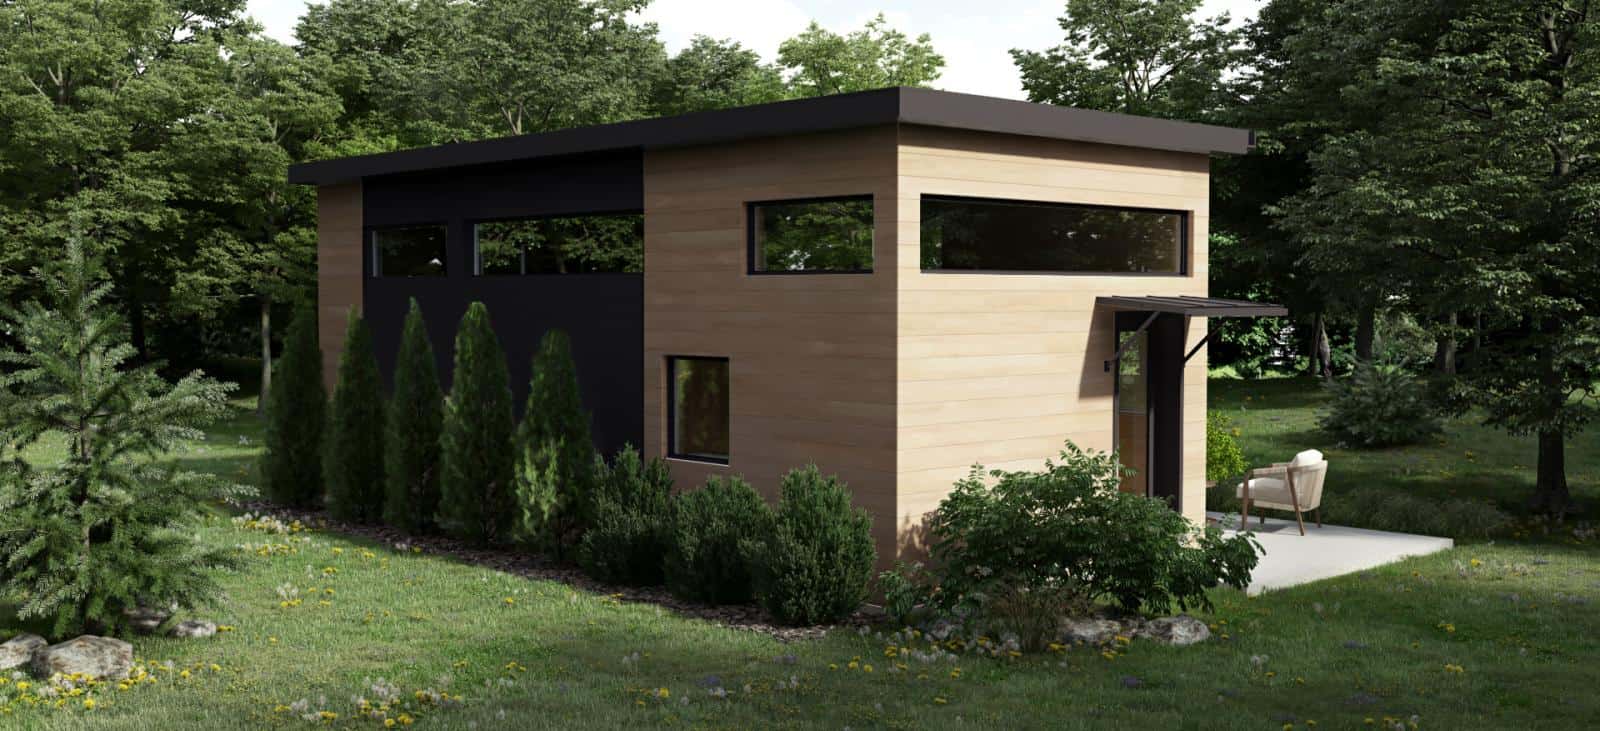 Baldwin Mini Home small prefab home or ADU by Dvele - exterior rear and side view.